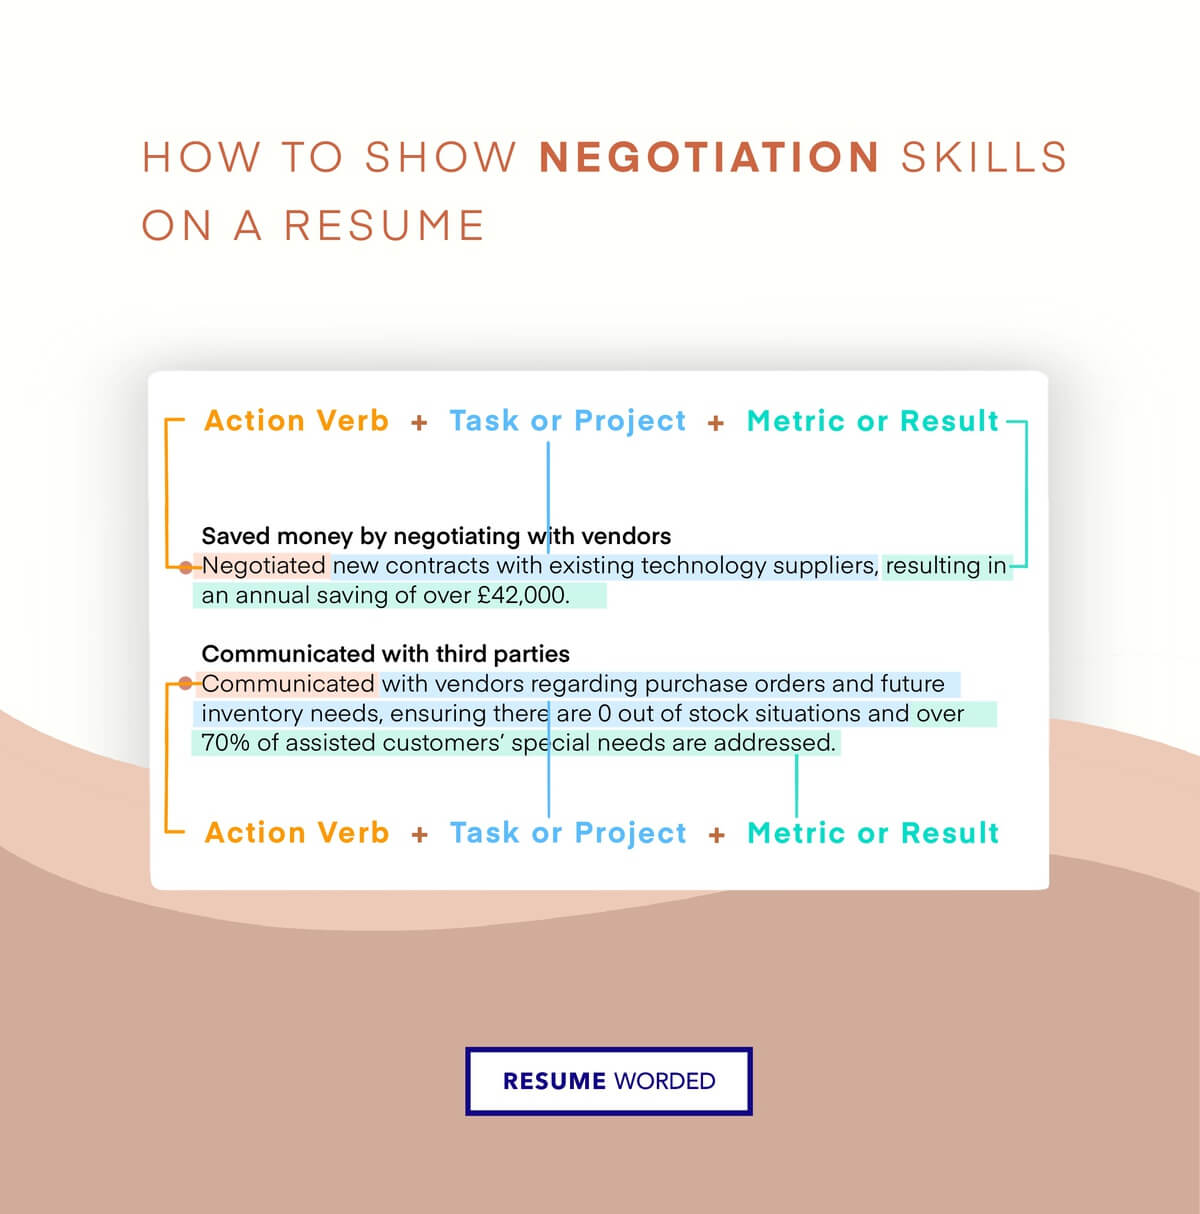 Emphasize your negotiation and communication skills - Contract Administrator CV